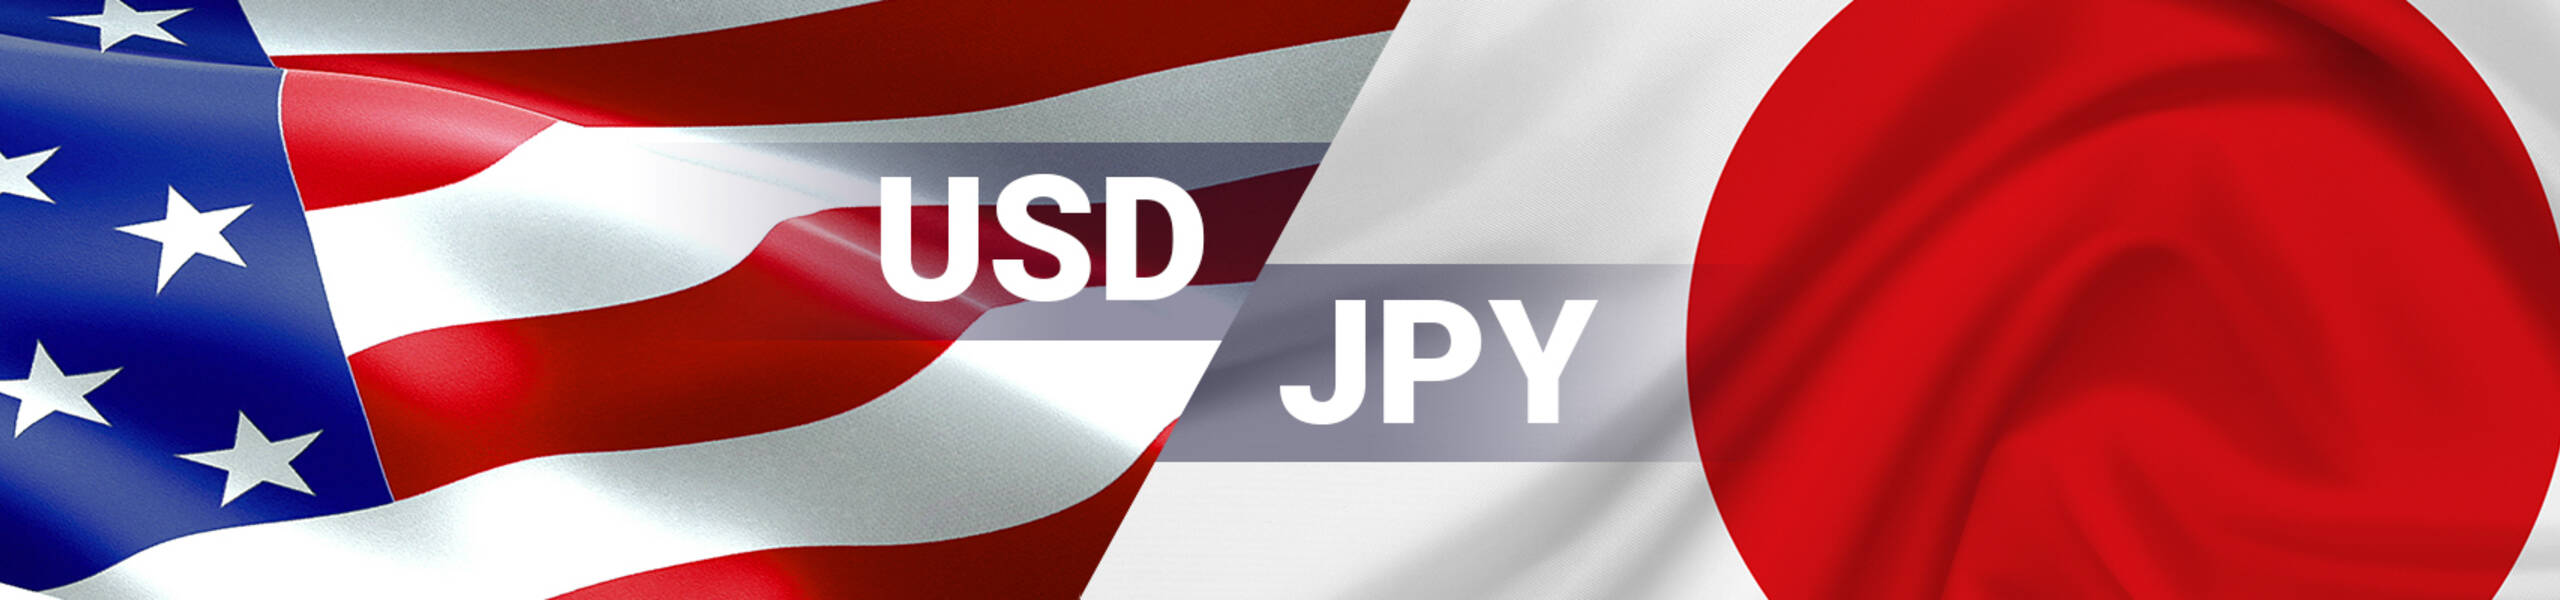 USD/JPY: Dollar tested SSB’s support